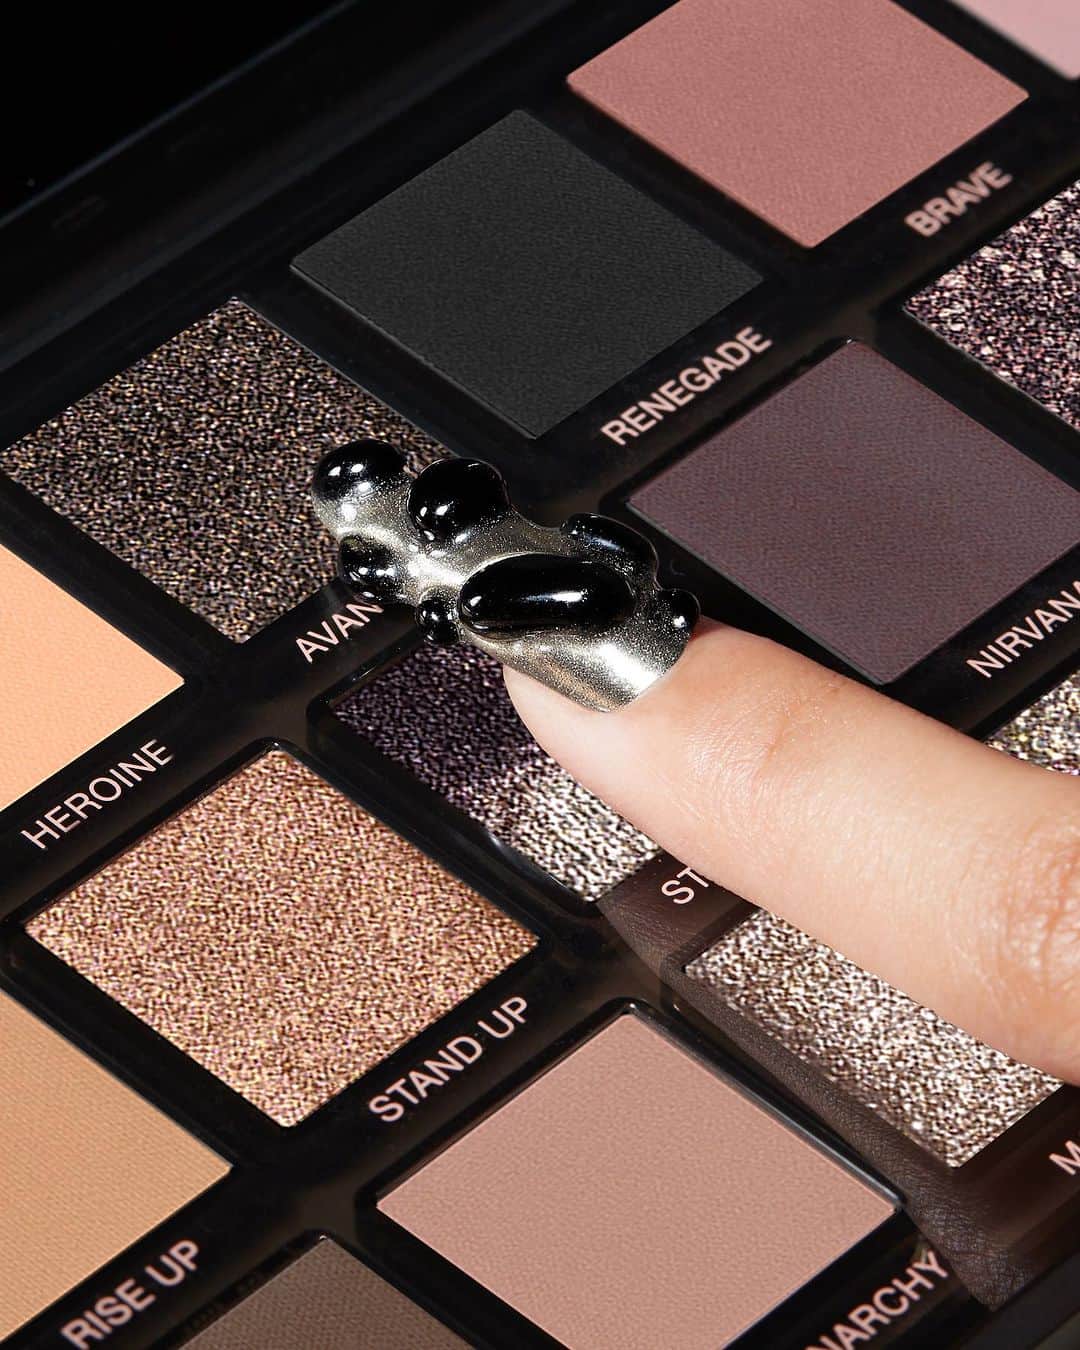 Huda Kattanのインスタグラム：「Velvety browns, versatile nudes, metallic shimmers & a black eye gloss that screams baddie energy. 🖤   Our #PrettyGrunge Eyeshadow Palette is all about breaking free & embracing your inner rebel. It’s a shout-out to those that dare to shatter the rules… & we know that’s you. 😉   Includes ⤵️    x11 Powder Mattes   x1 Powder Metallic   x1 Soft Shine Metallic    x1 Crushed Trio Chrome    x2 Creamy Metallics    x1 Black Eye Gloss     🌍  𝗔𝗩𝗔𝗜𝗟𝗔𝗕𝗟𝗘 𝗚𝗟𝗢𝗕𝗔𝗟𝗟𝗬 𝗡𝗢𝗩 𝟭🌎 #PrettyGrunge」